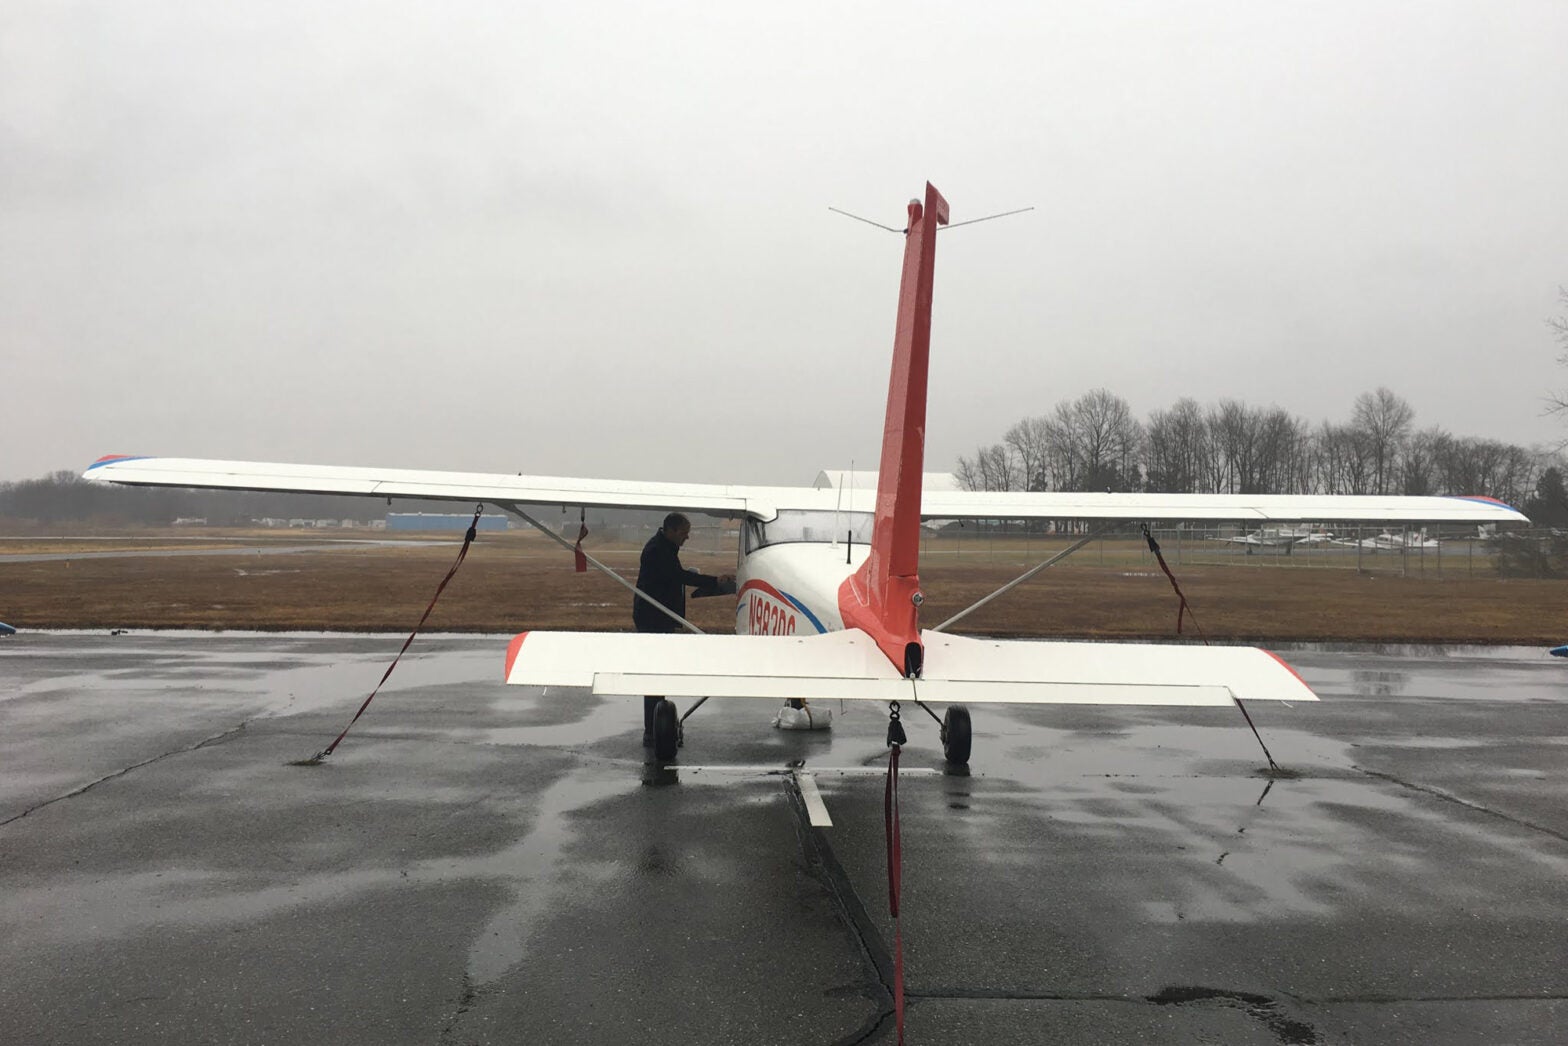 Getting an Instrument Rating